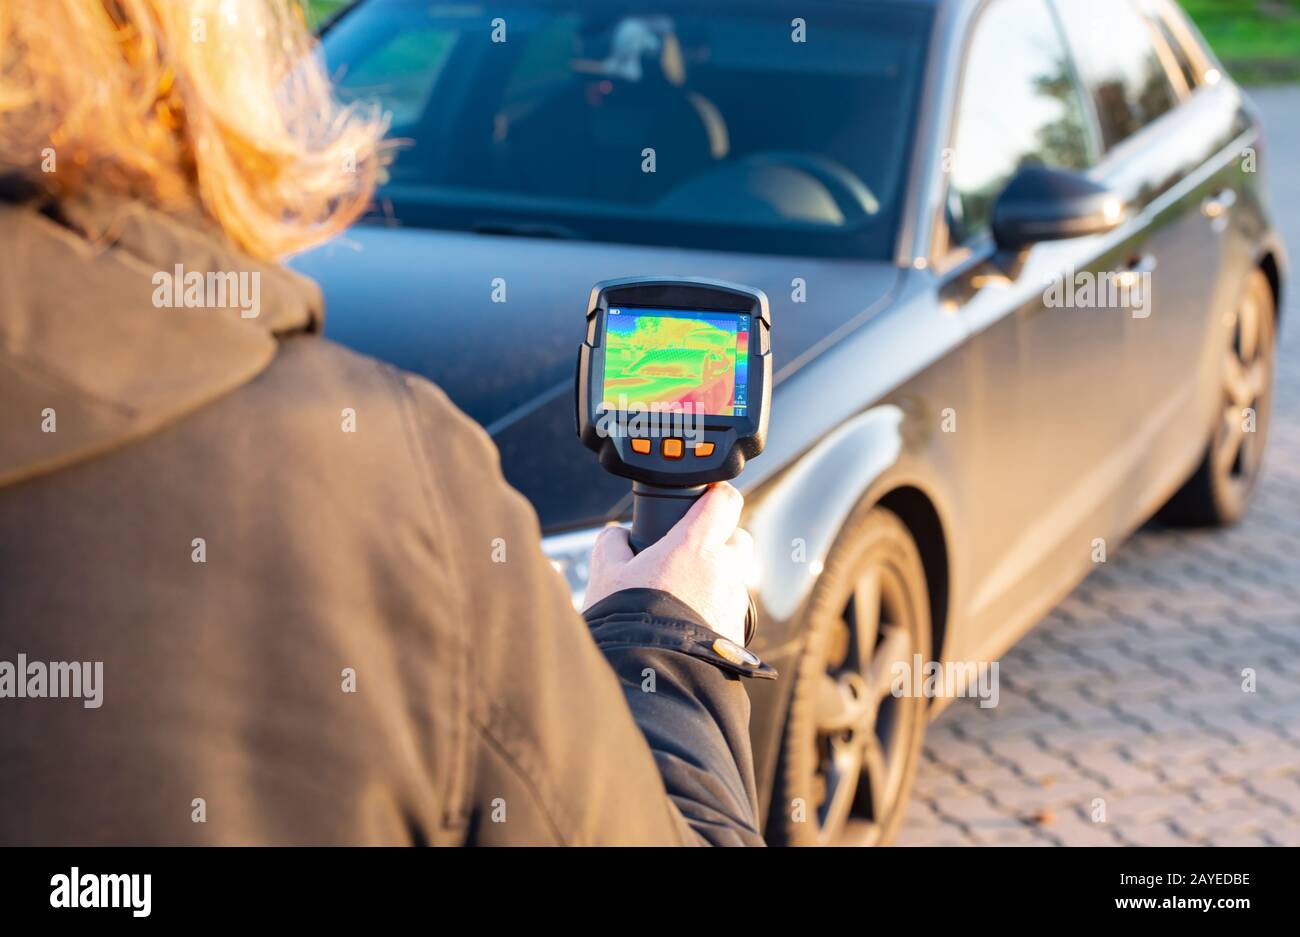 Woman shows with a thermal imager on a building to detect defects as an infrared image Stock Photo